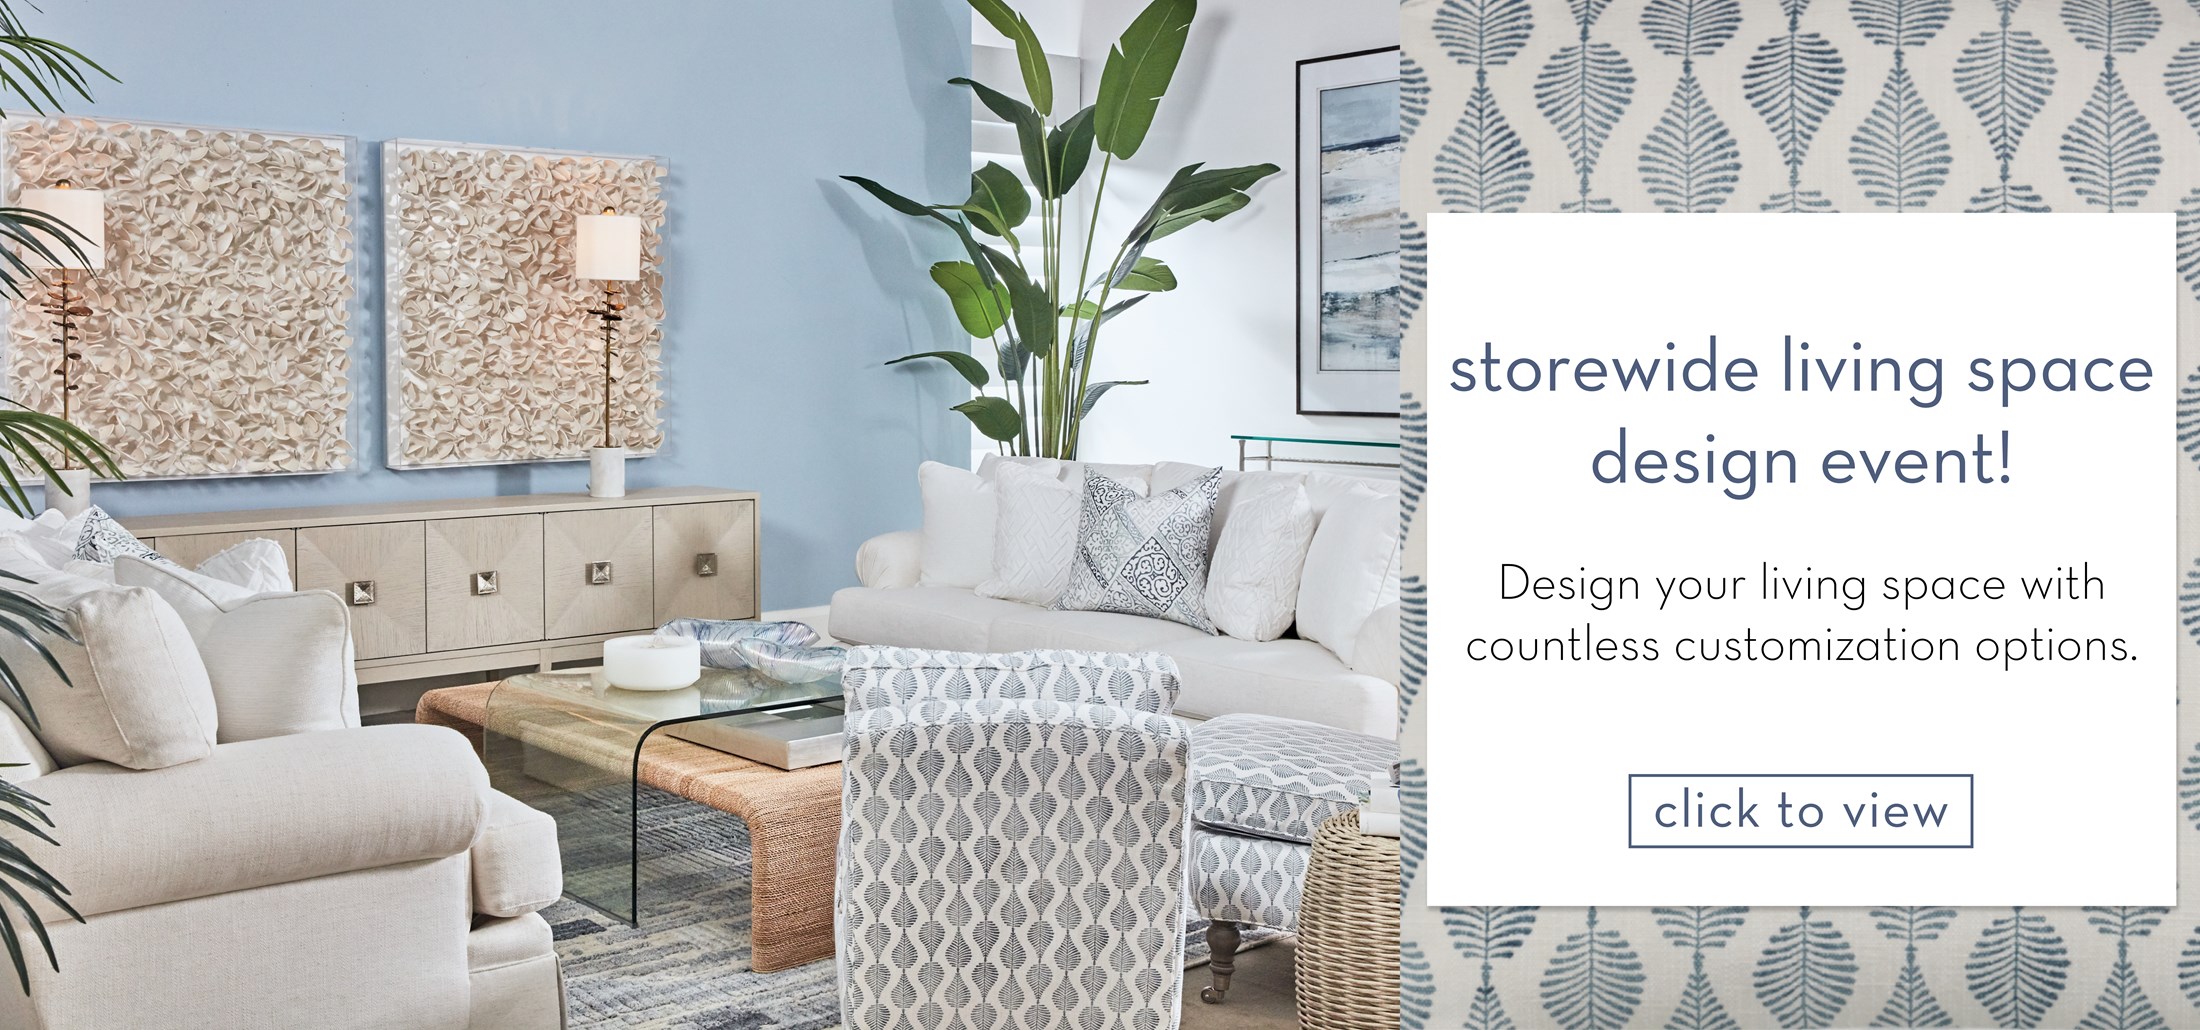 Image of a Modern Beach House Living Room and Audrey Chair Pattern. Text: Storewide living space design event! Design your living space with countless customization options. Links to event.